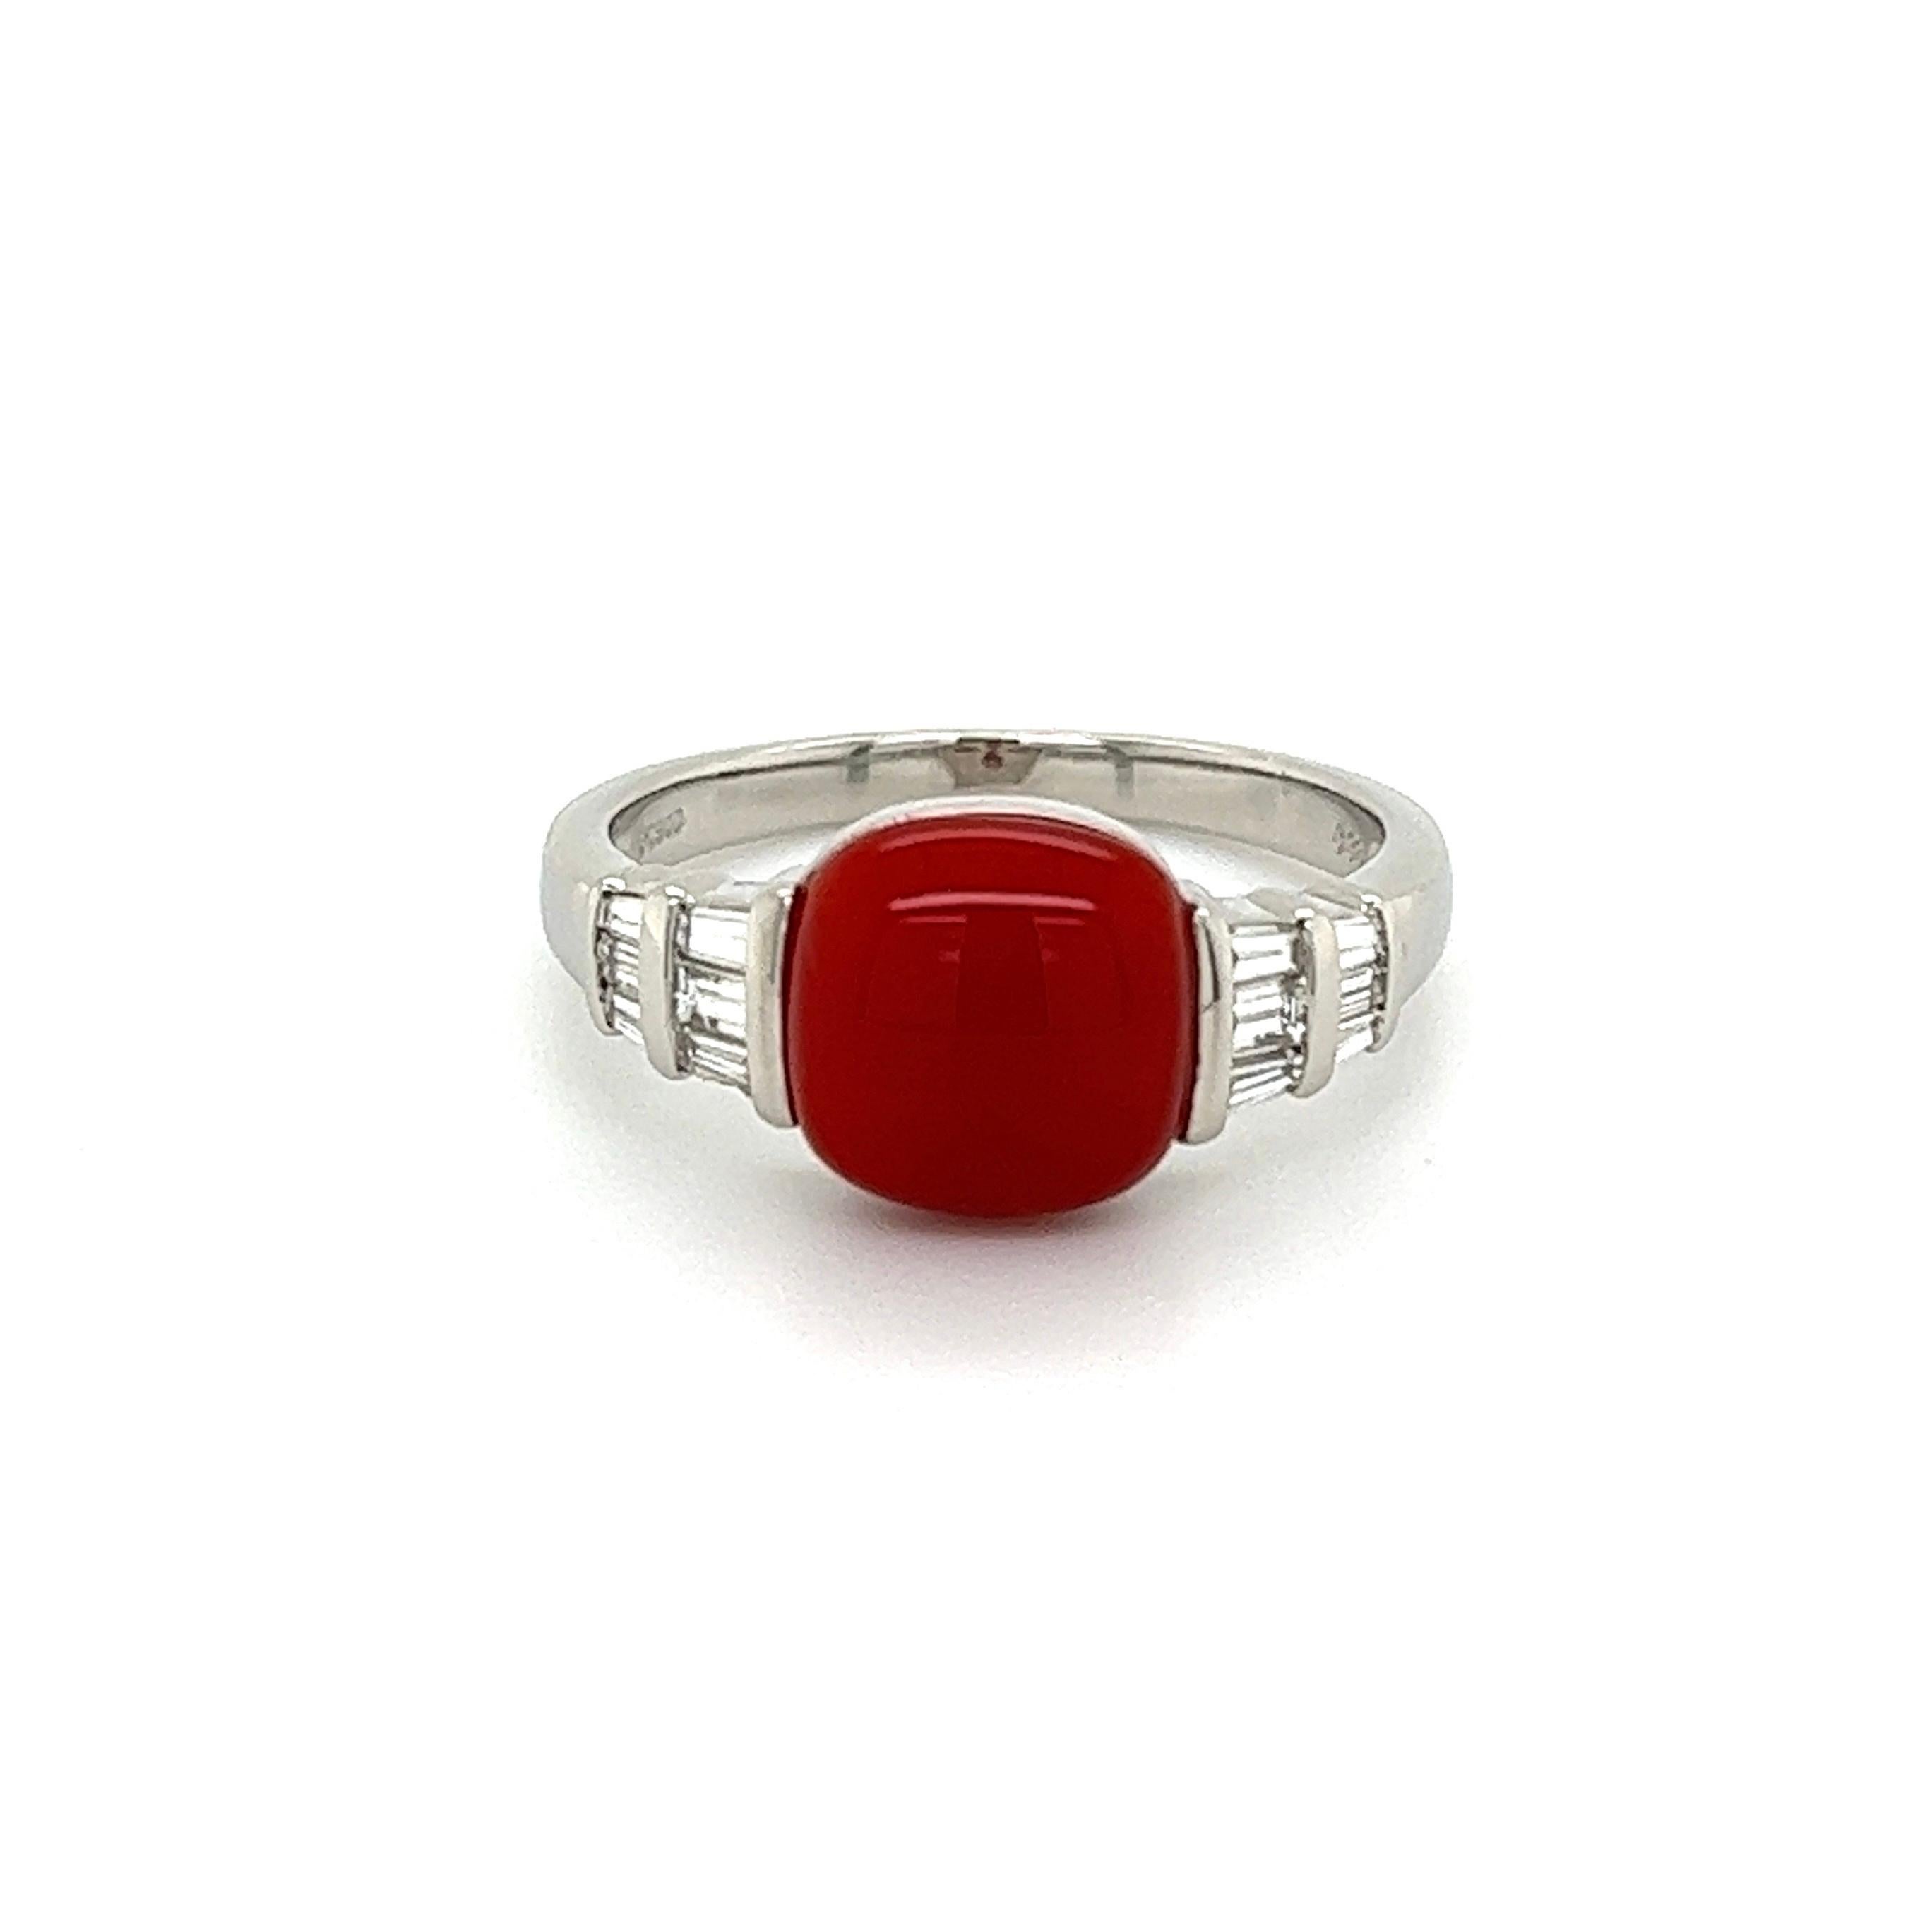 Simply Beautiful! Finely detailed Red Coral and Diamond Platinum Cocktail Ring. Centering a securely nestled Hand set 9.5mm Coral, either side set with Baguette Diamonds, approx. 0.38tcw. Approx. Dimensions: 0.99” l x 0.87” w x 0.36” h. Hand crafted